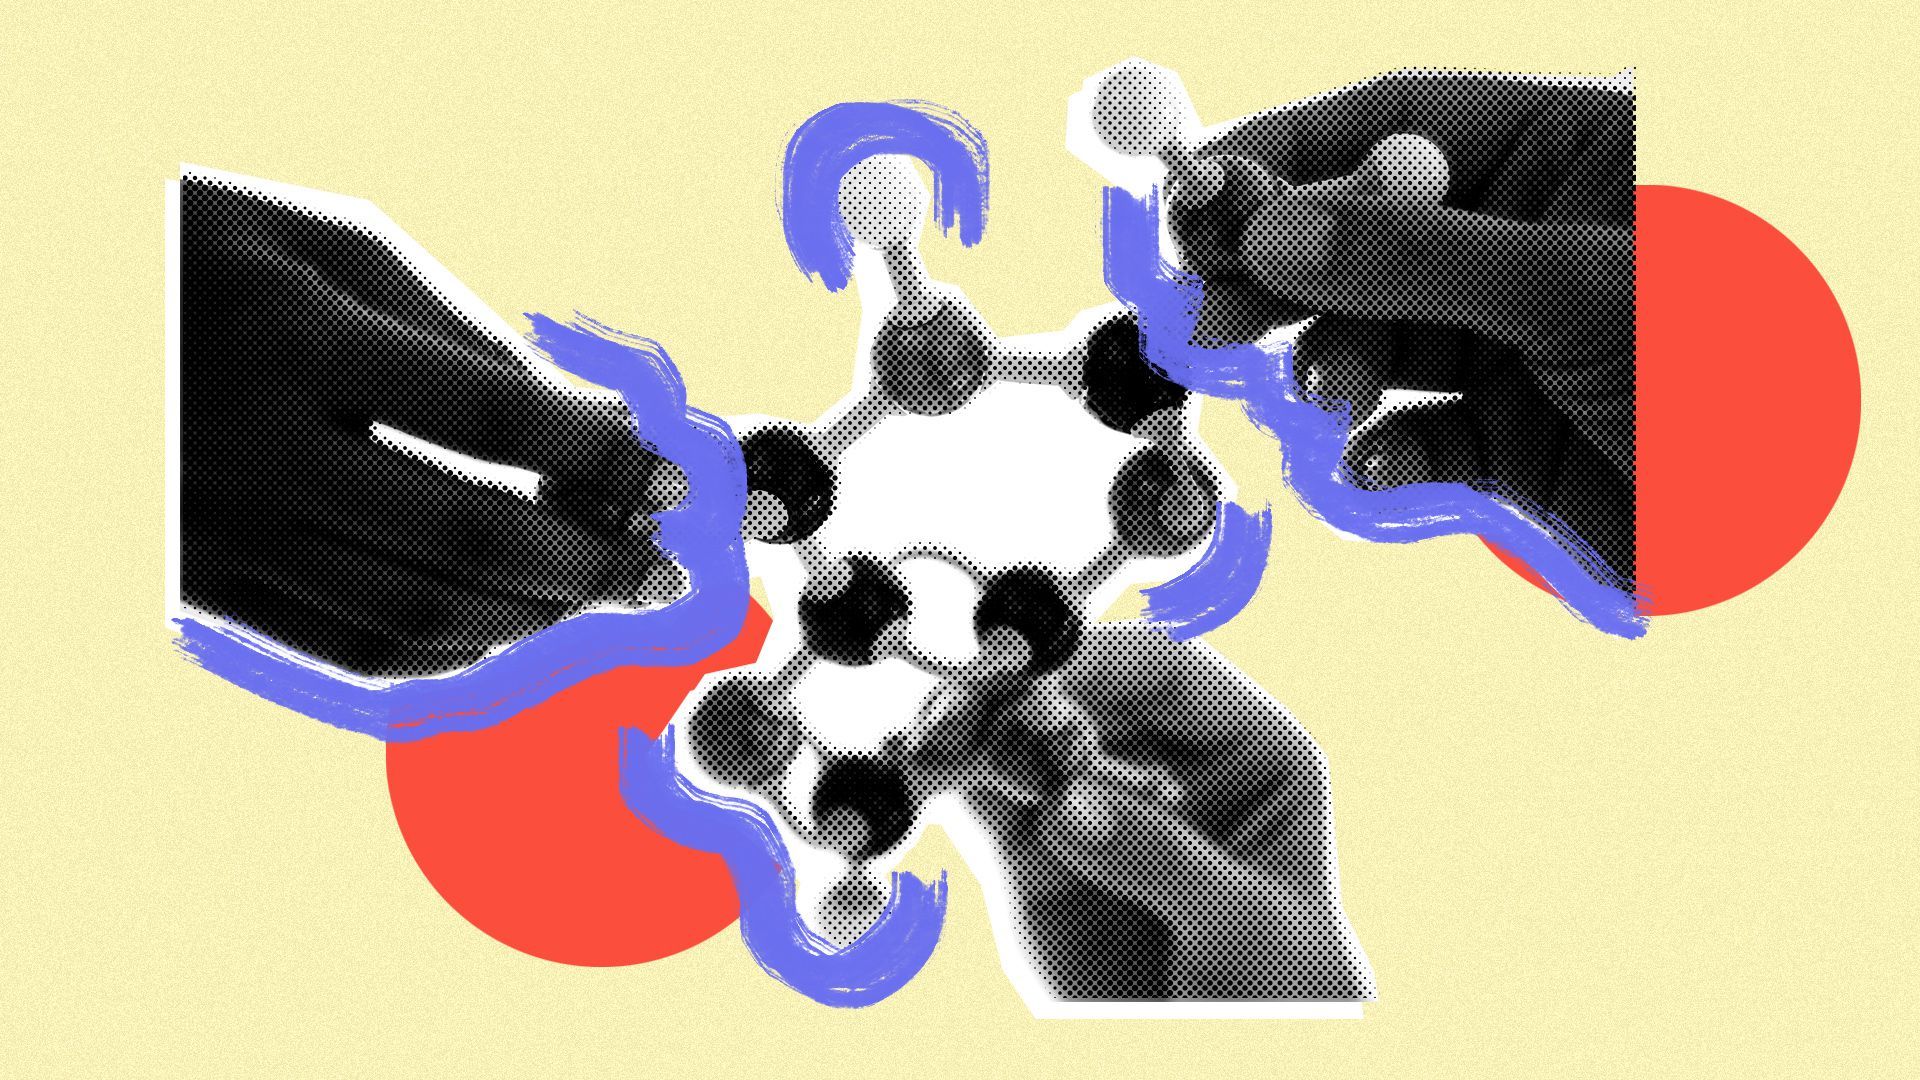 Illustration collage of hands and a molecule model